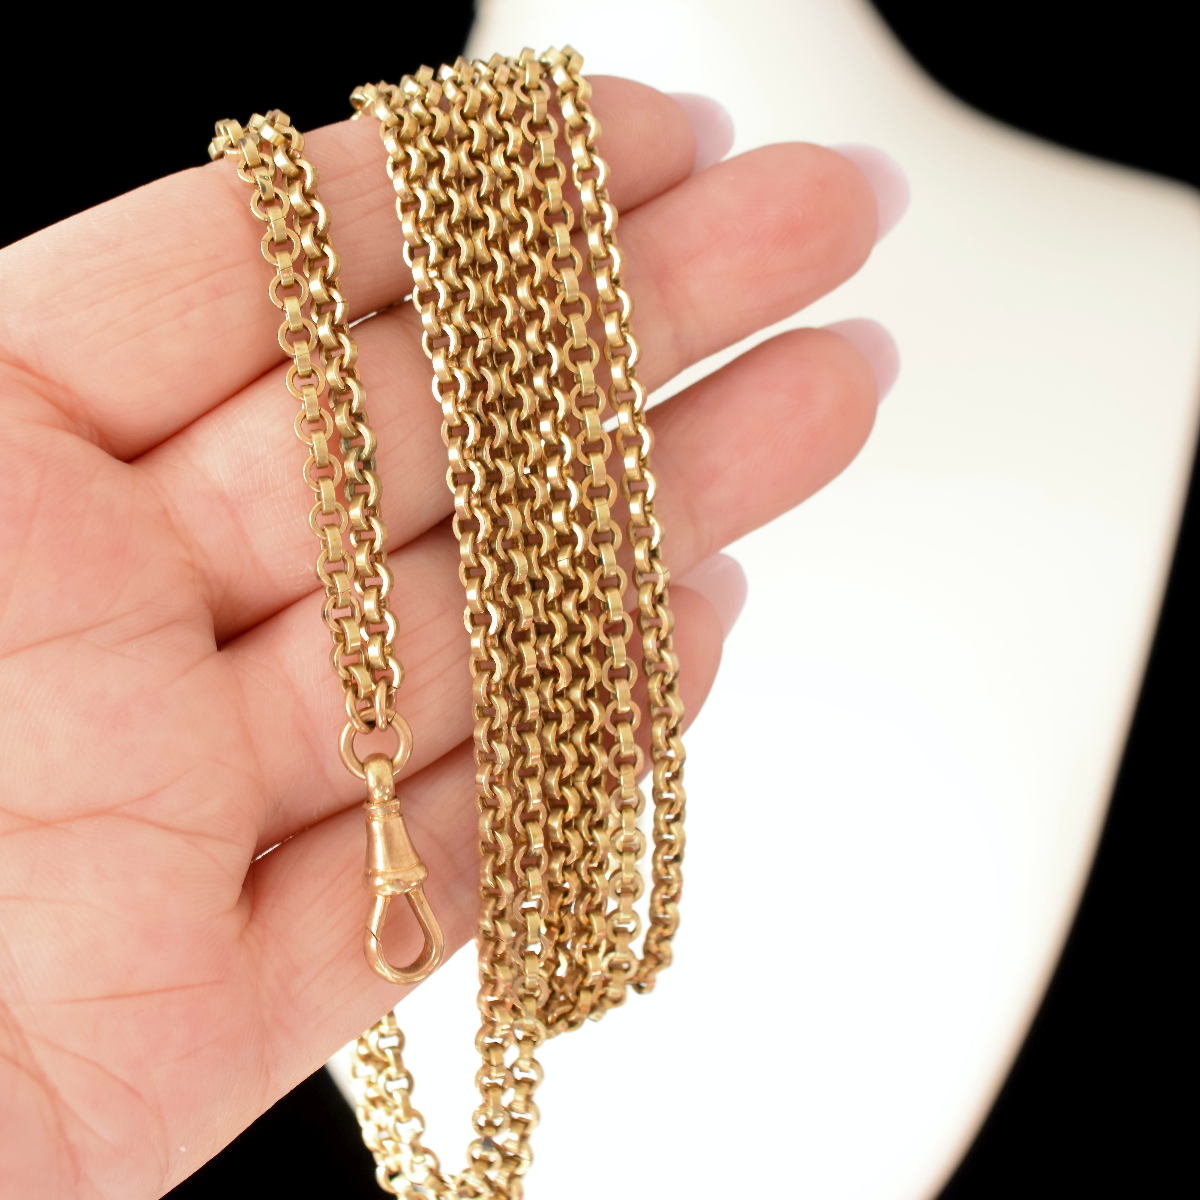 Antique ‘Rolled Gold’ Long Guard/Muff Chain Circa 1900